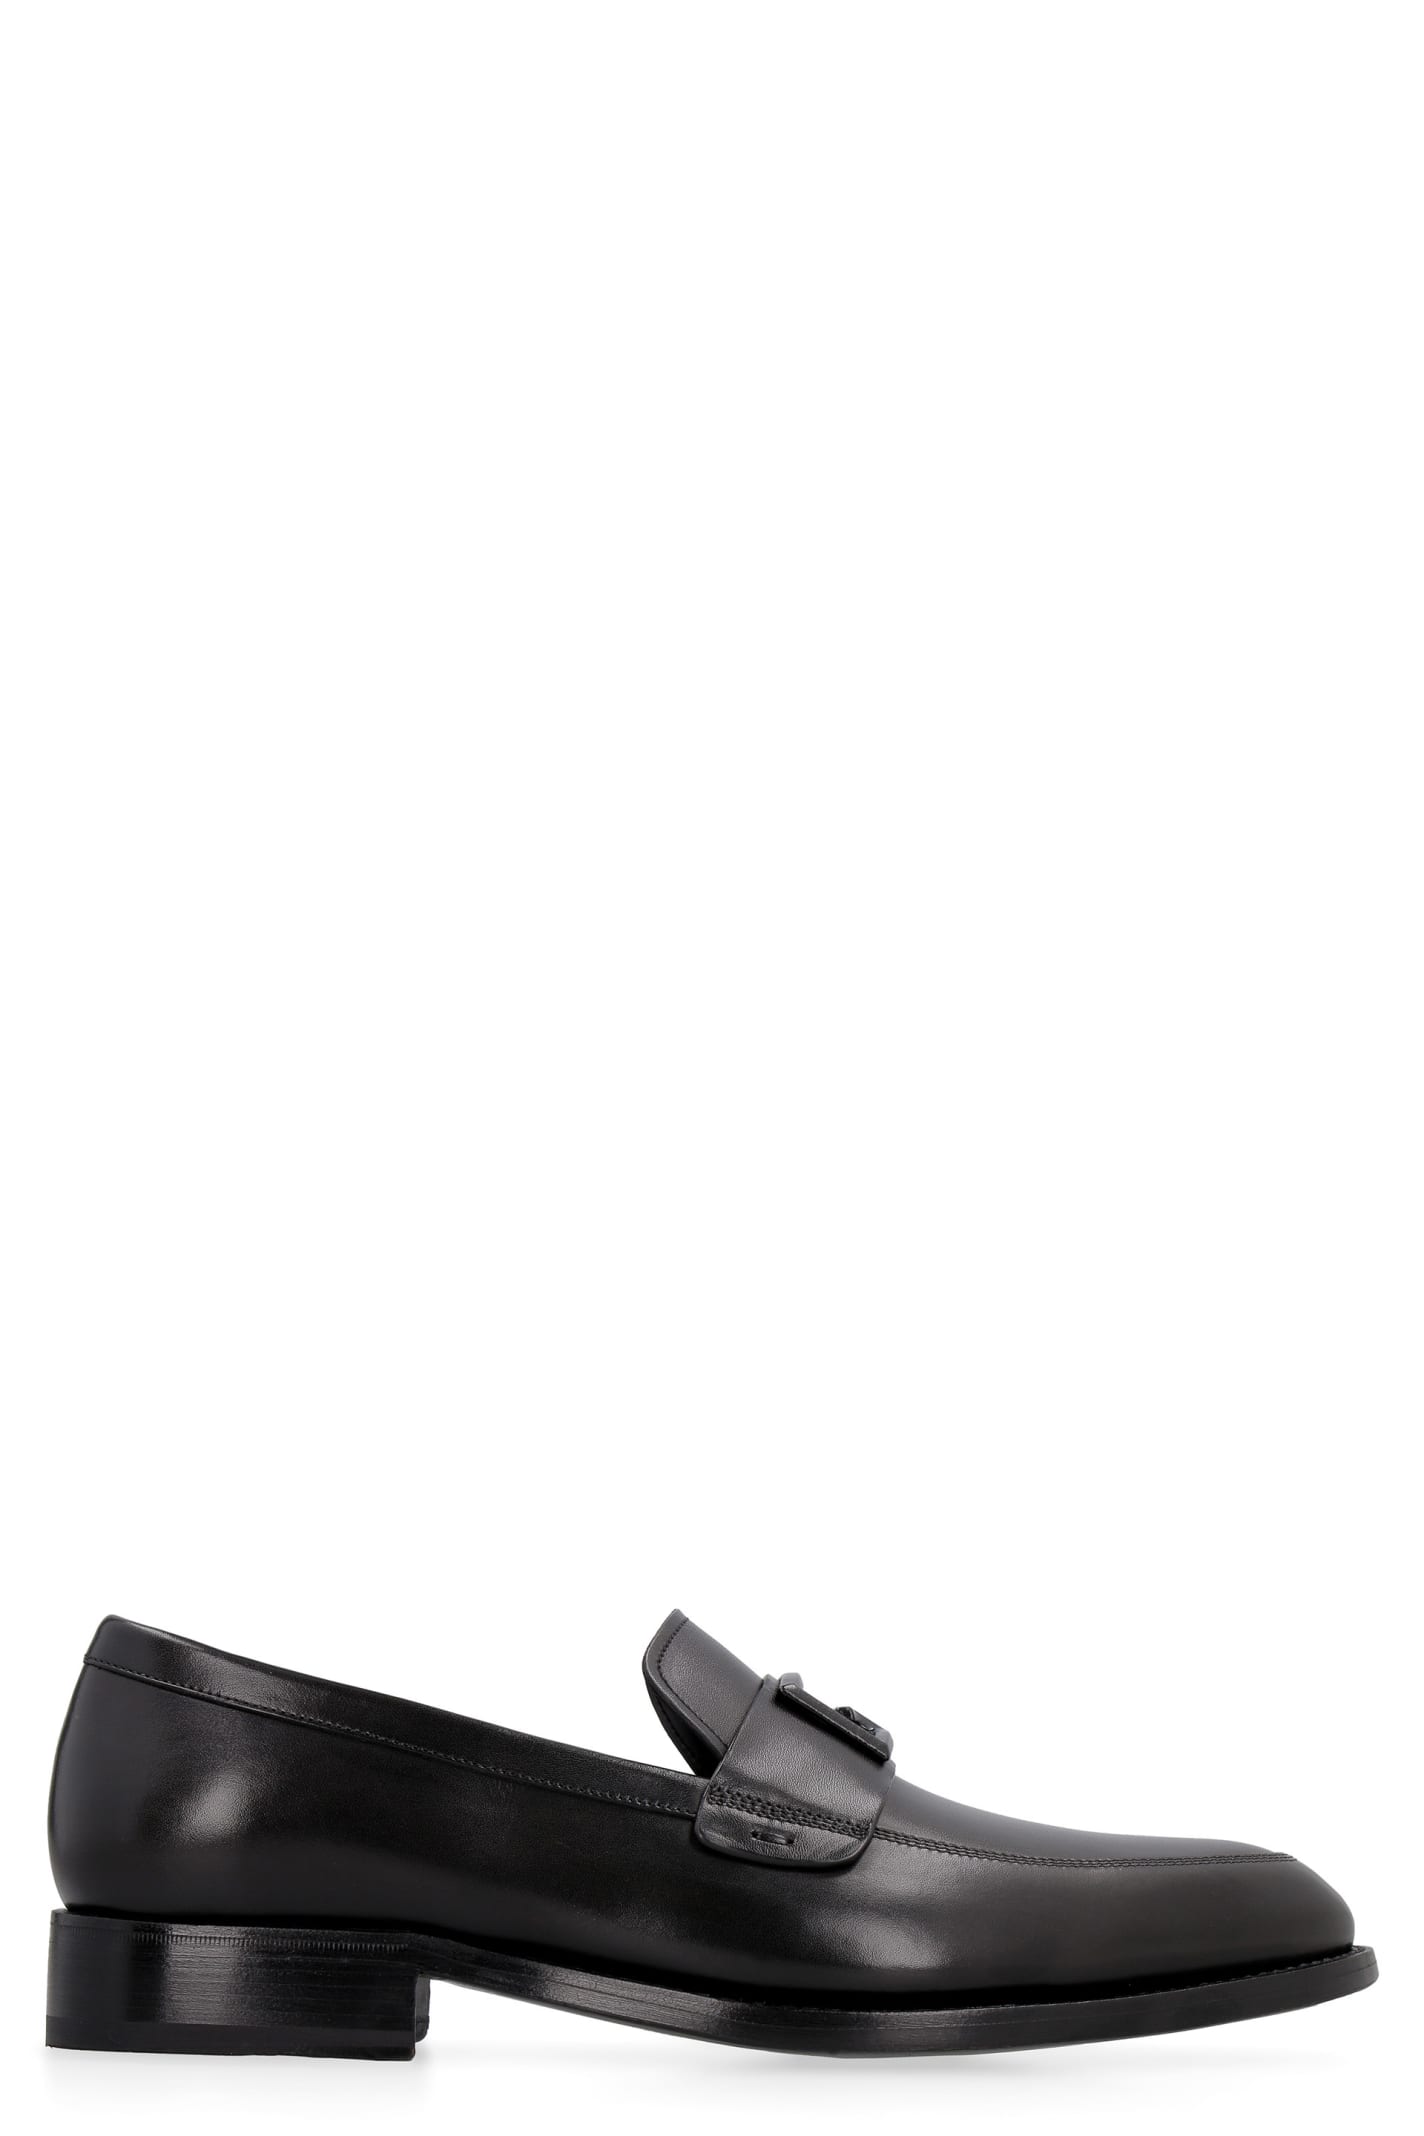 Givenchy Logo Detail Leather Loafers